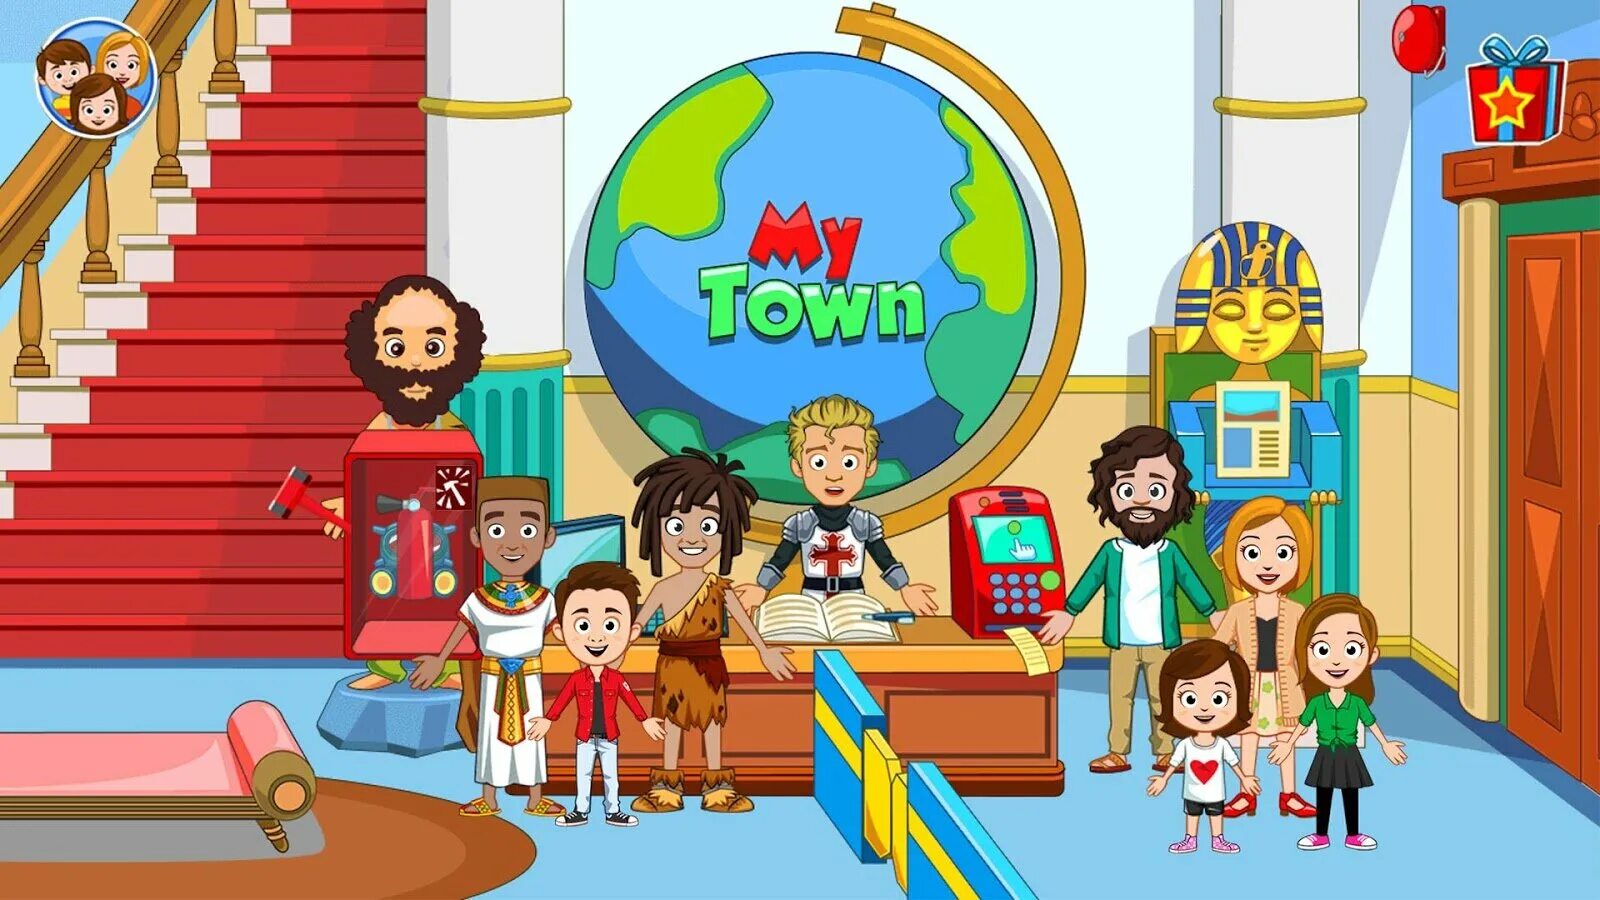 My town 6. My Town музей. Карточки музей для детей. My Town Museum old APK. Museum picture for Kids.